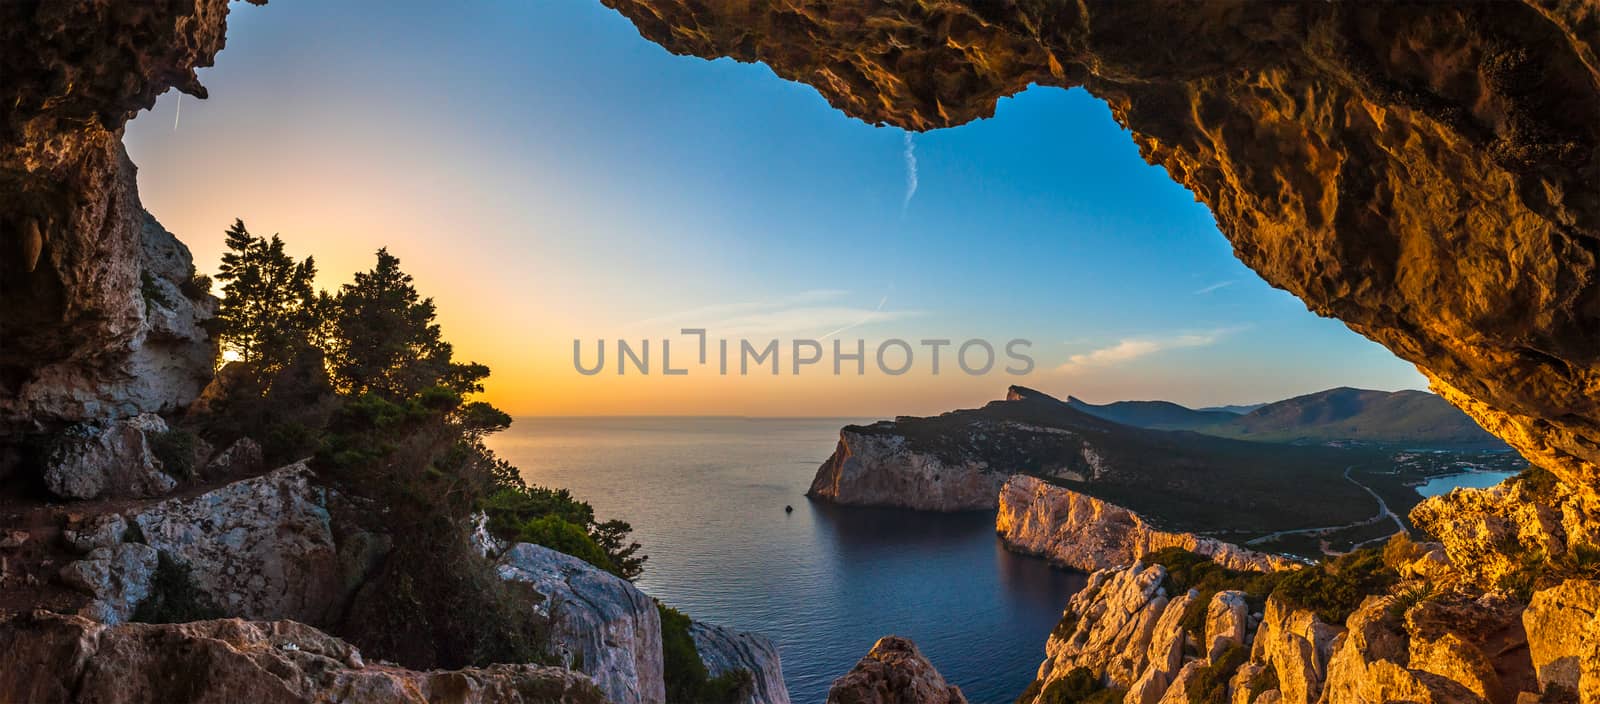 Landscape of the gulf of capo caccia from the Cave of broken vessels at sunset